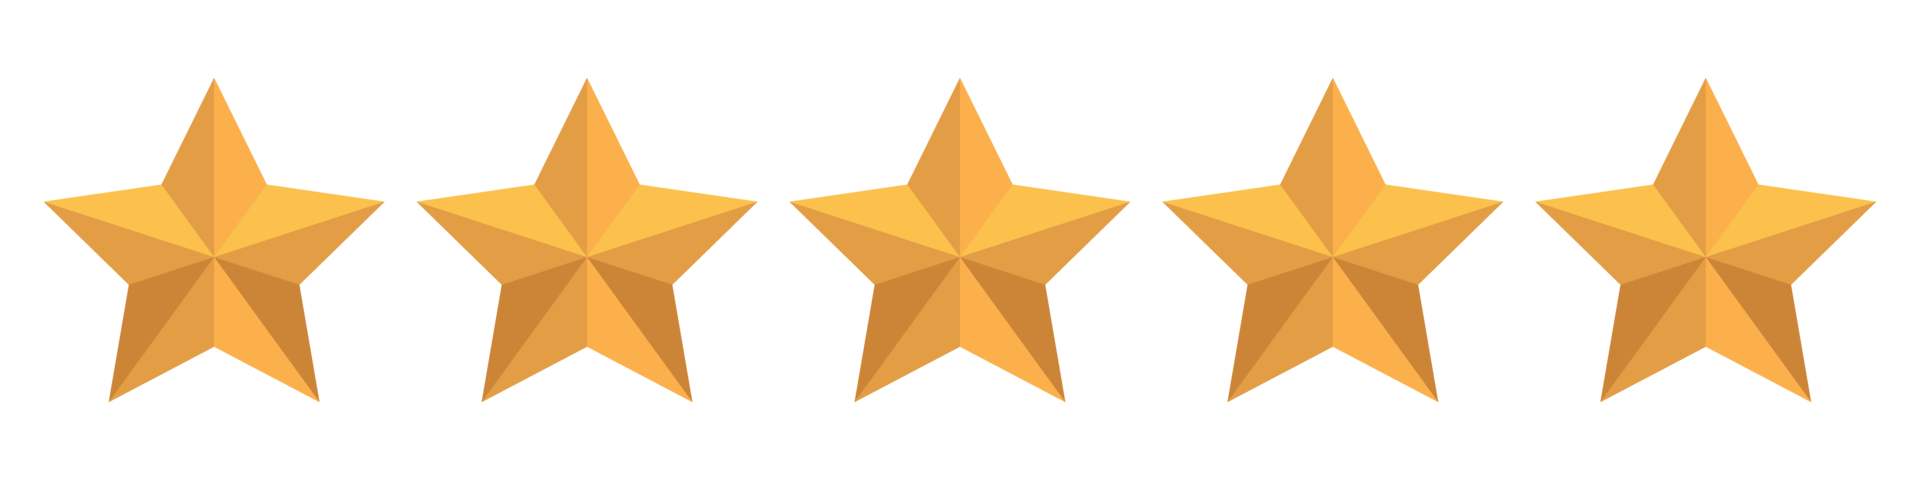 yellow-five-stars-quality-rating-icons-5-stars-icon-five-star-sign-rating-symbol-transparent-background-illustration-png.png